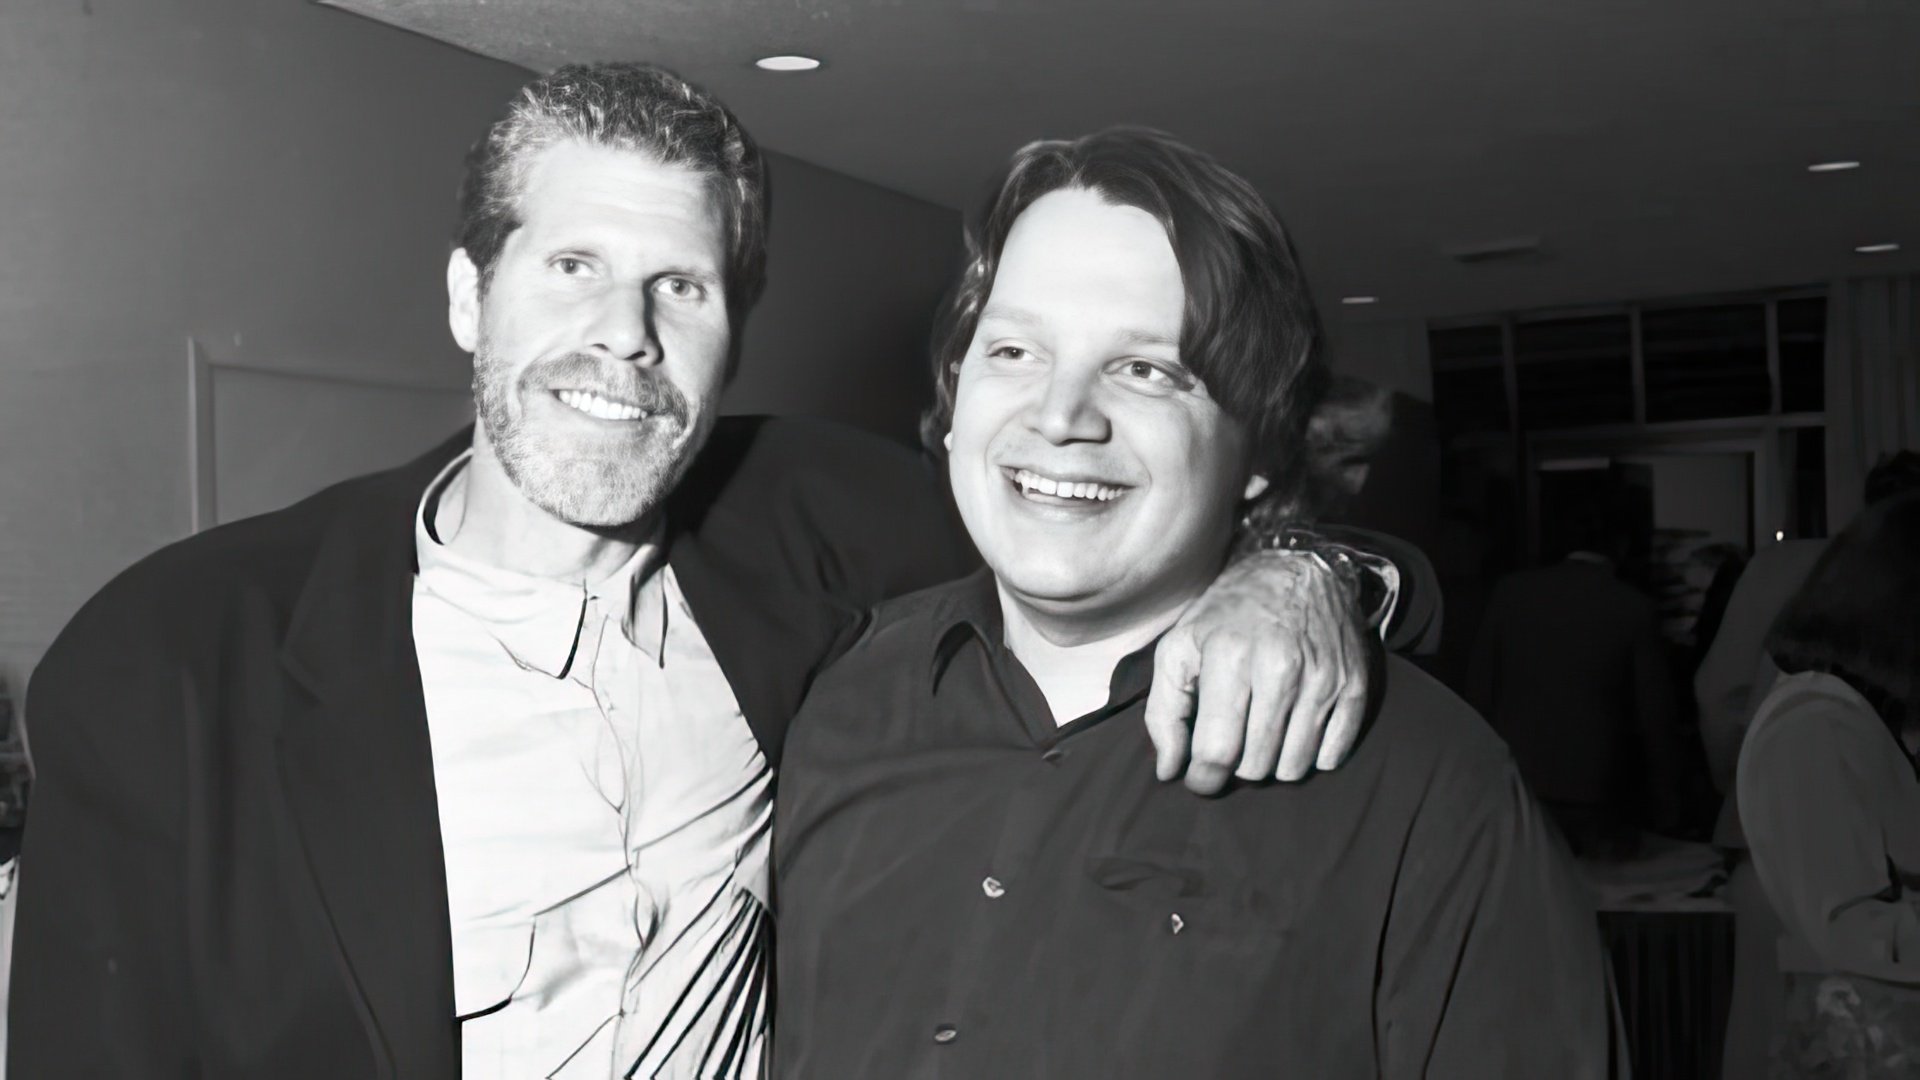 Guillermo del Toro and Ron Perlman, who played Hellboy